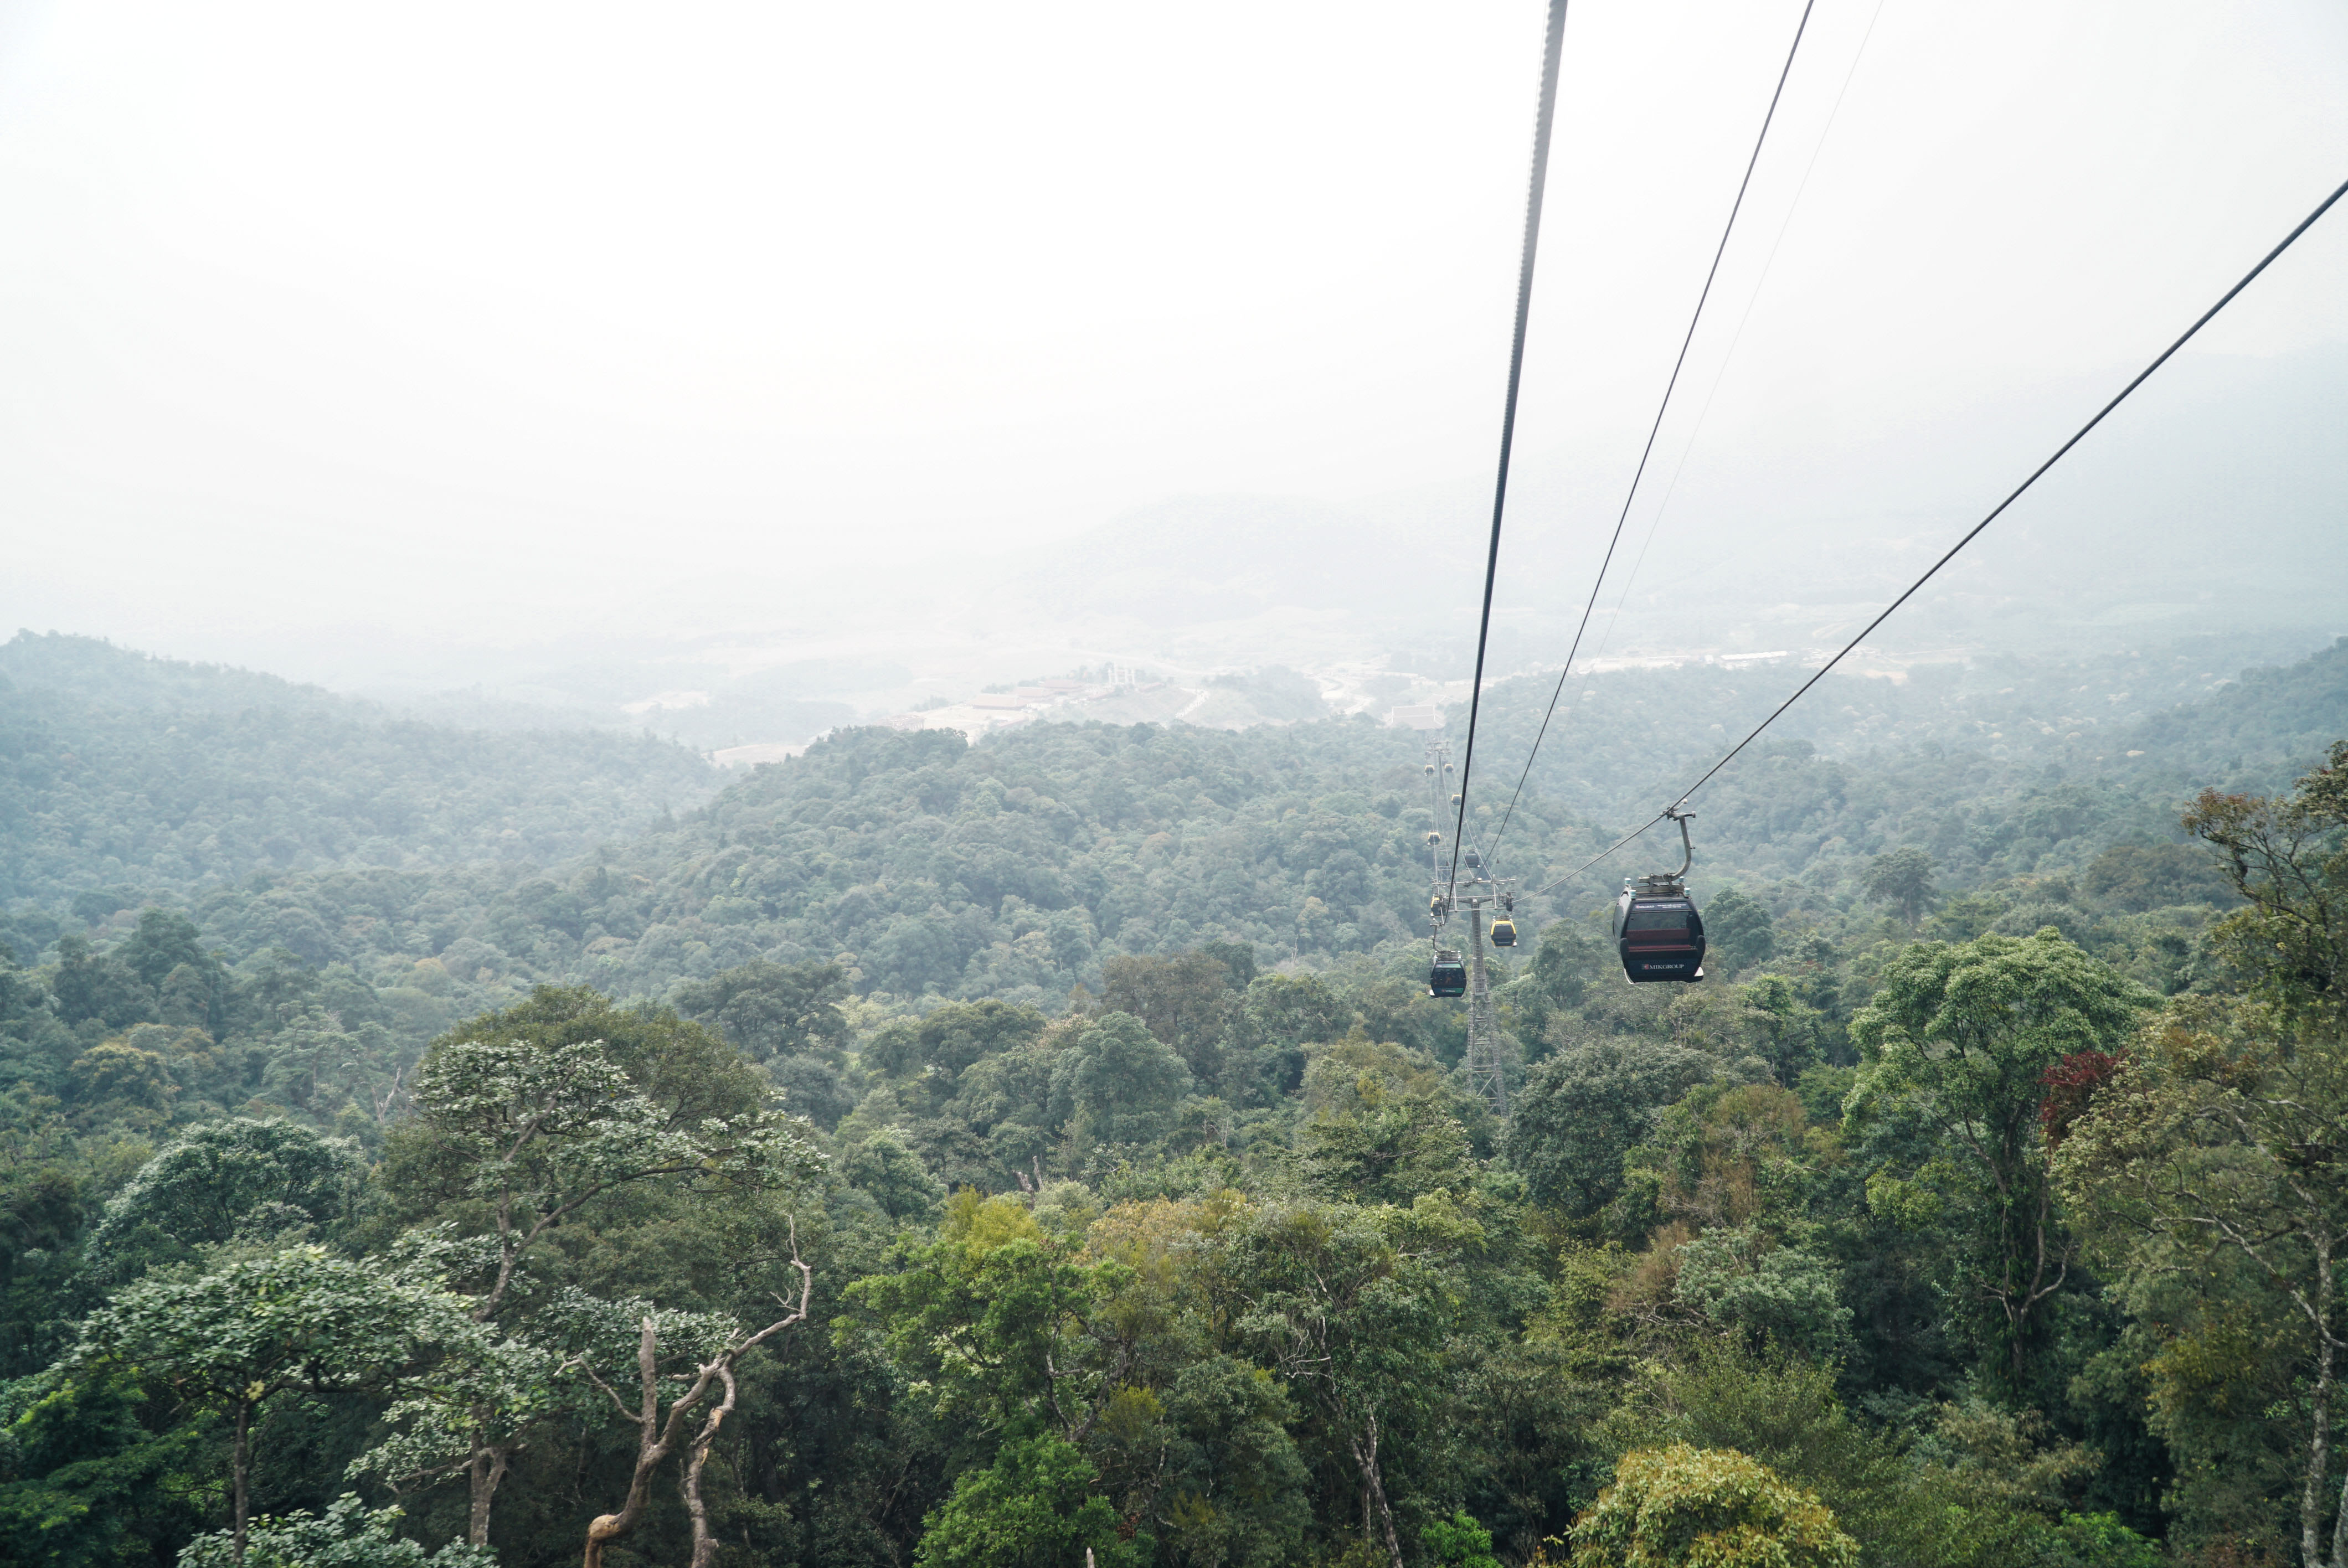 The cable car system at the Tay Yen Tu Spiritual-Ecological Tourist Area in Tay Yen Tu Town, Son Dong District, Bac Giang Province. Photo: Uyen/ Tuoi Tre News